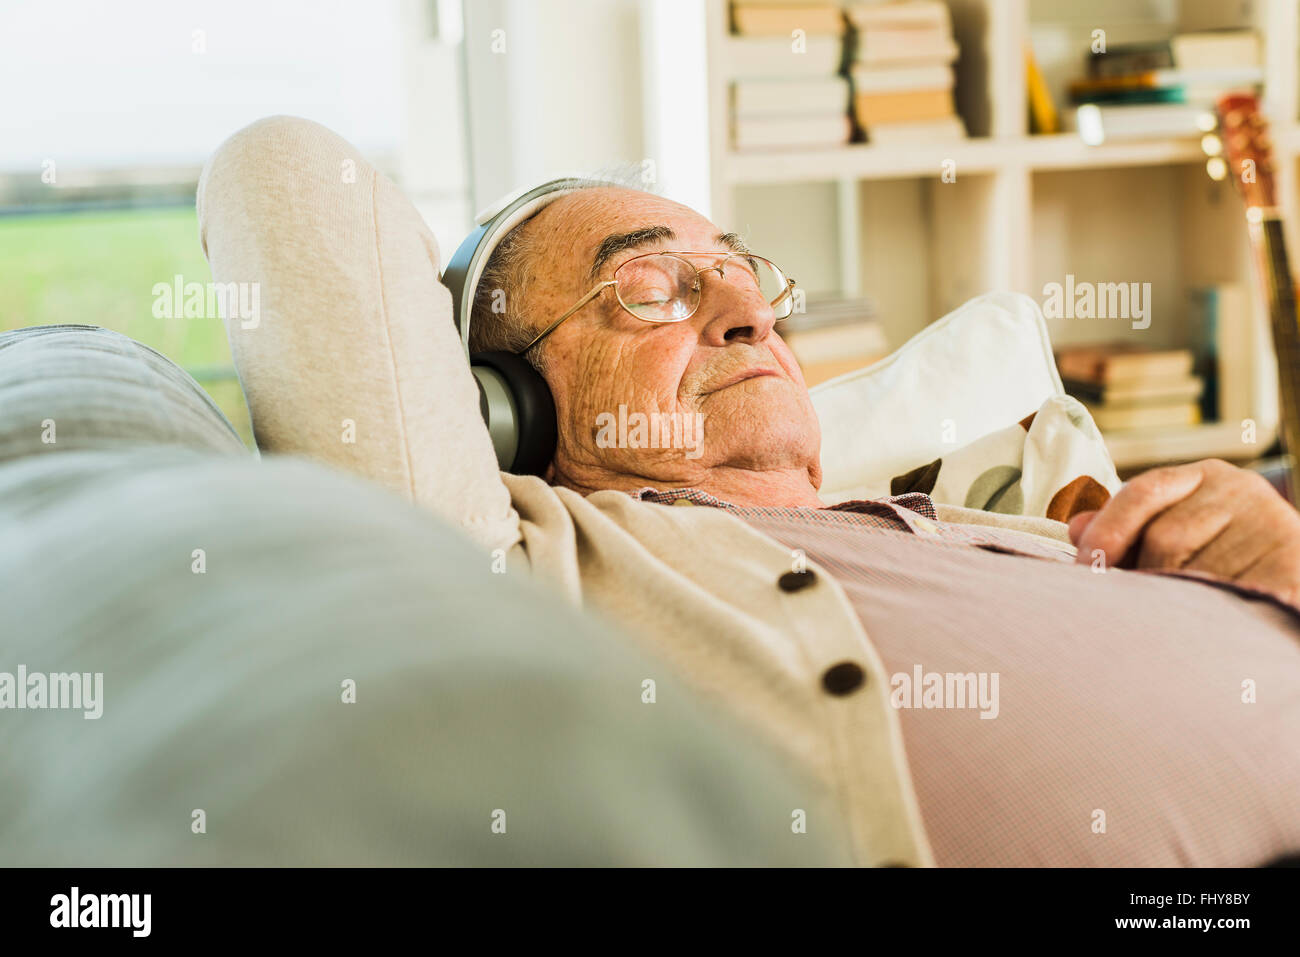 Senior man lying on the couch hearing music with headphones Stock Photo